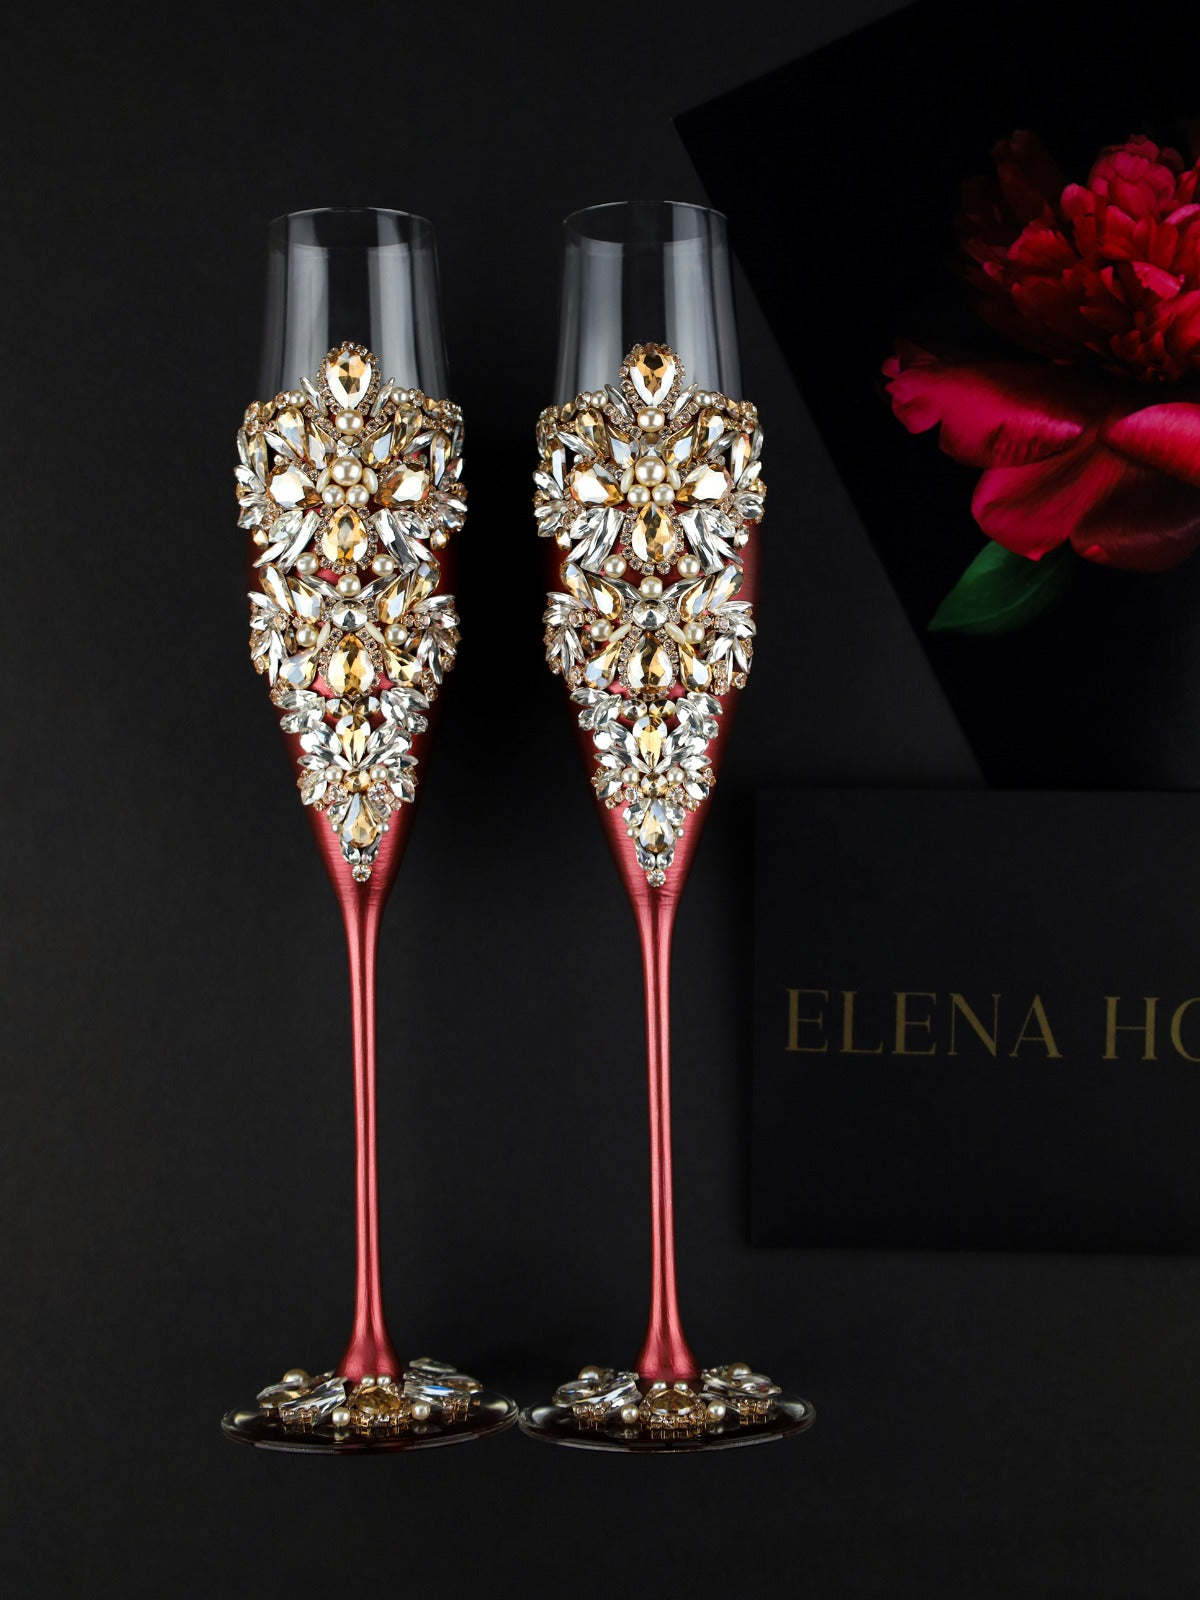 Burgundy champagne flutes and pillow for rings